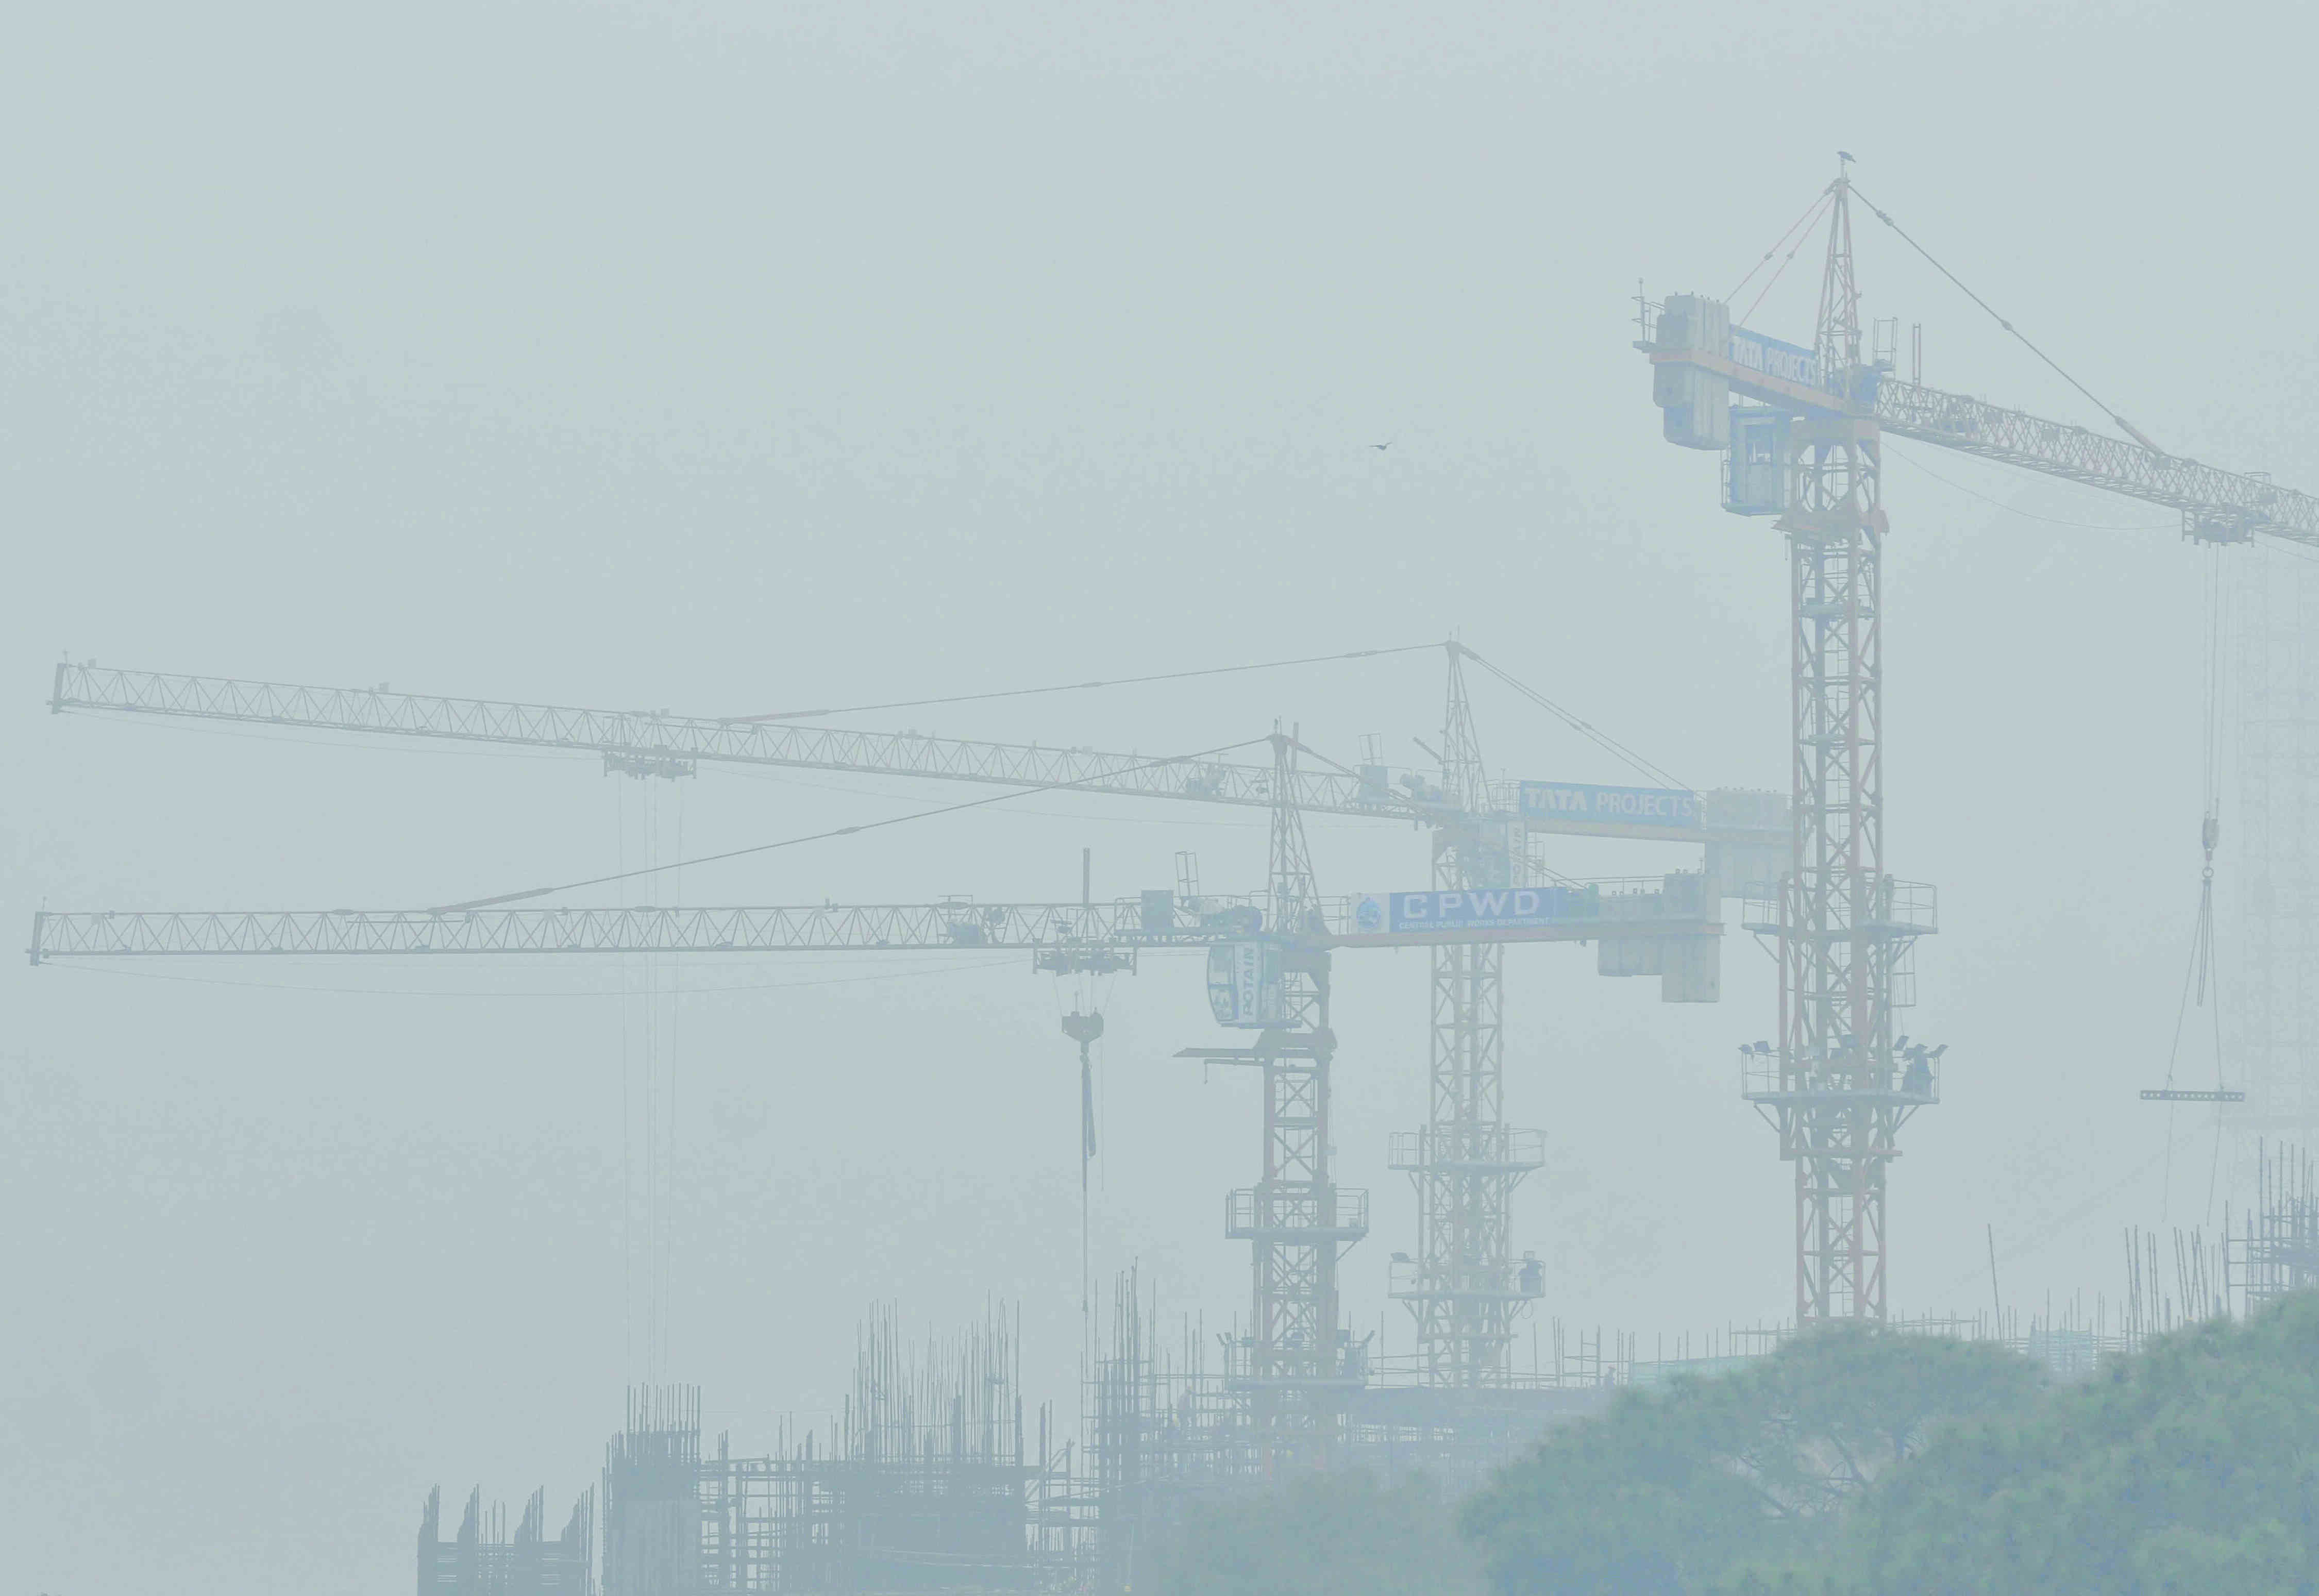 Ban off, CAQM presses for remote self-monitoring of construction sites in NCR